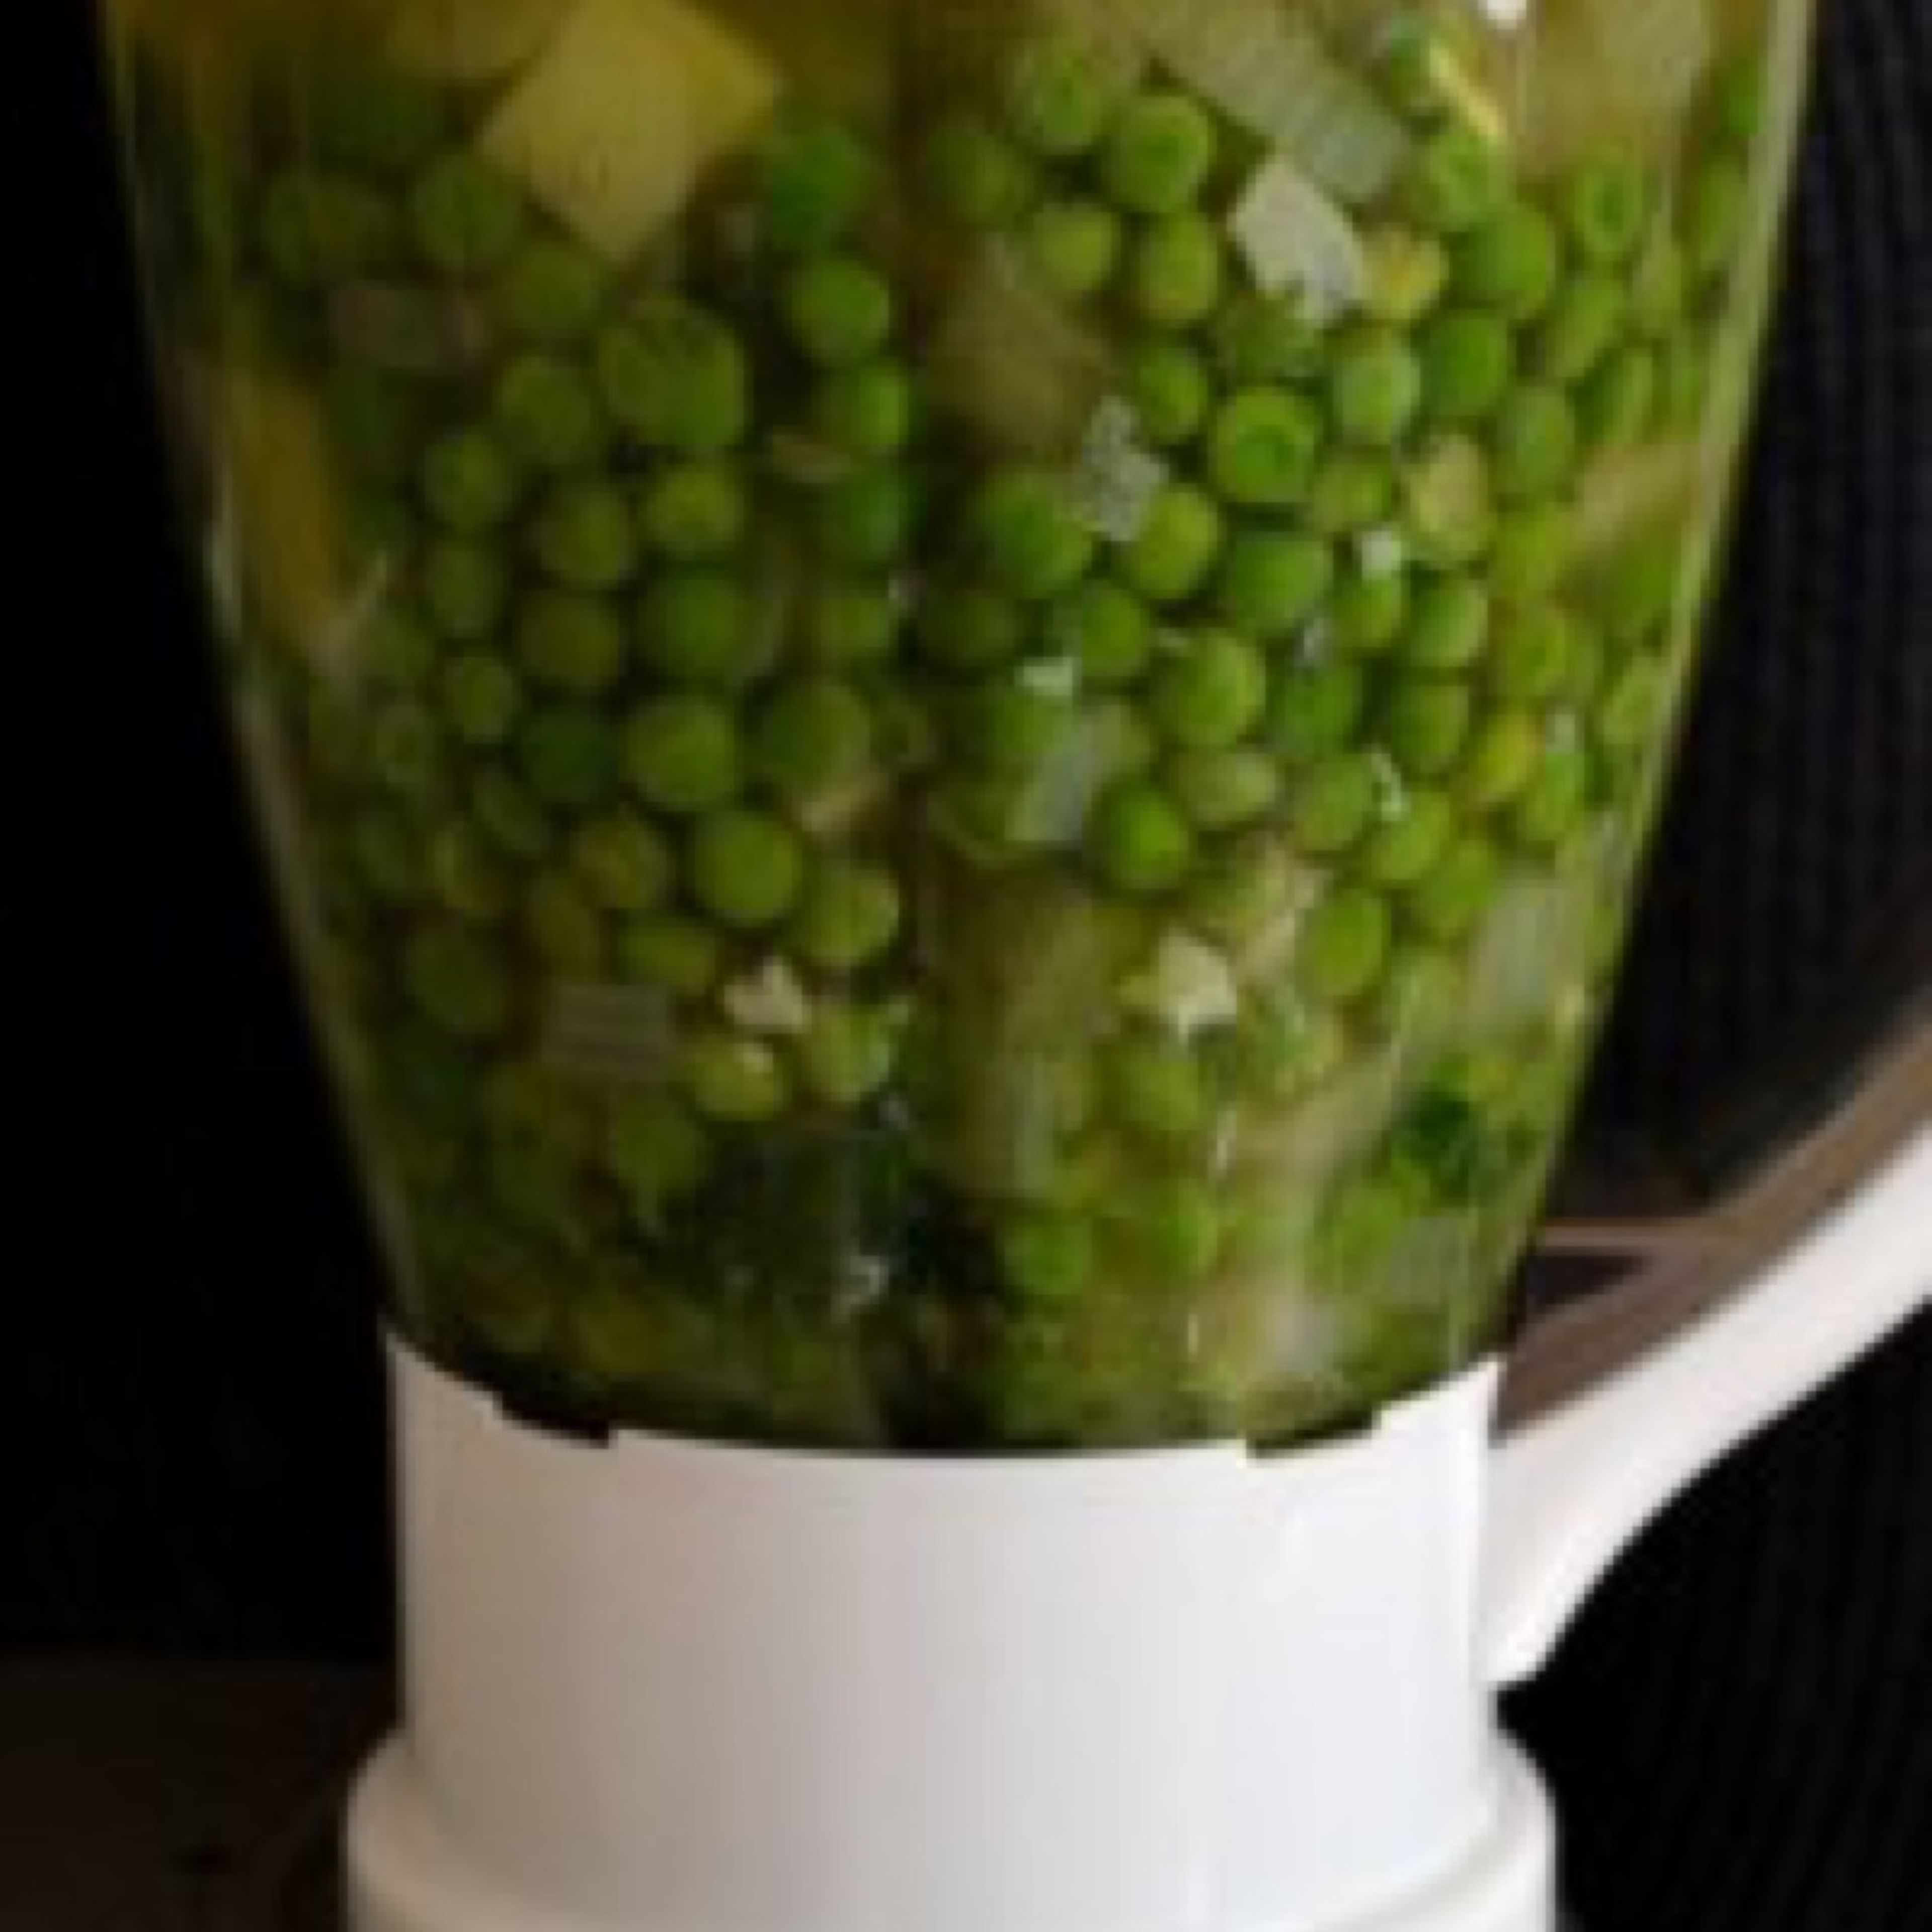 Pour soup into a food processor or blender and process until smooth in texture.